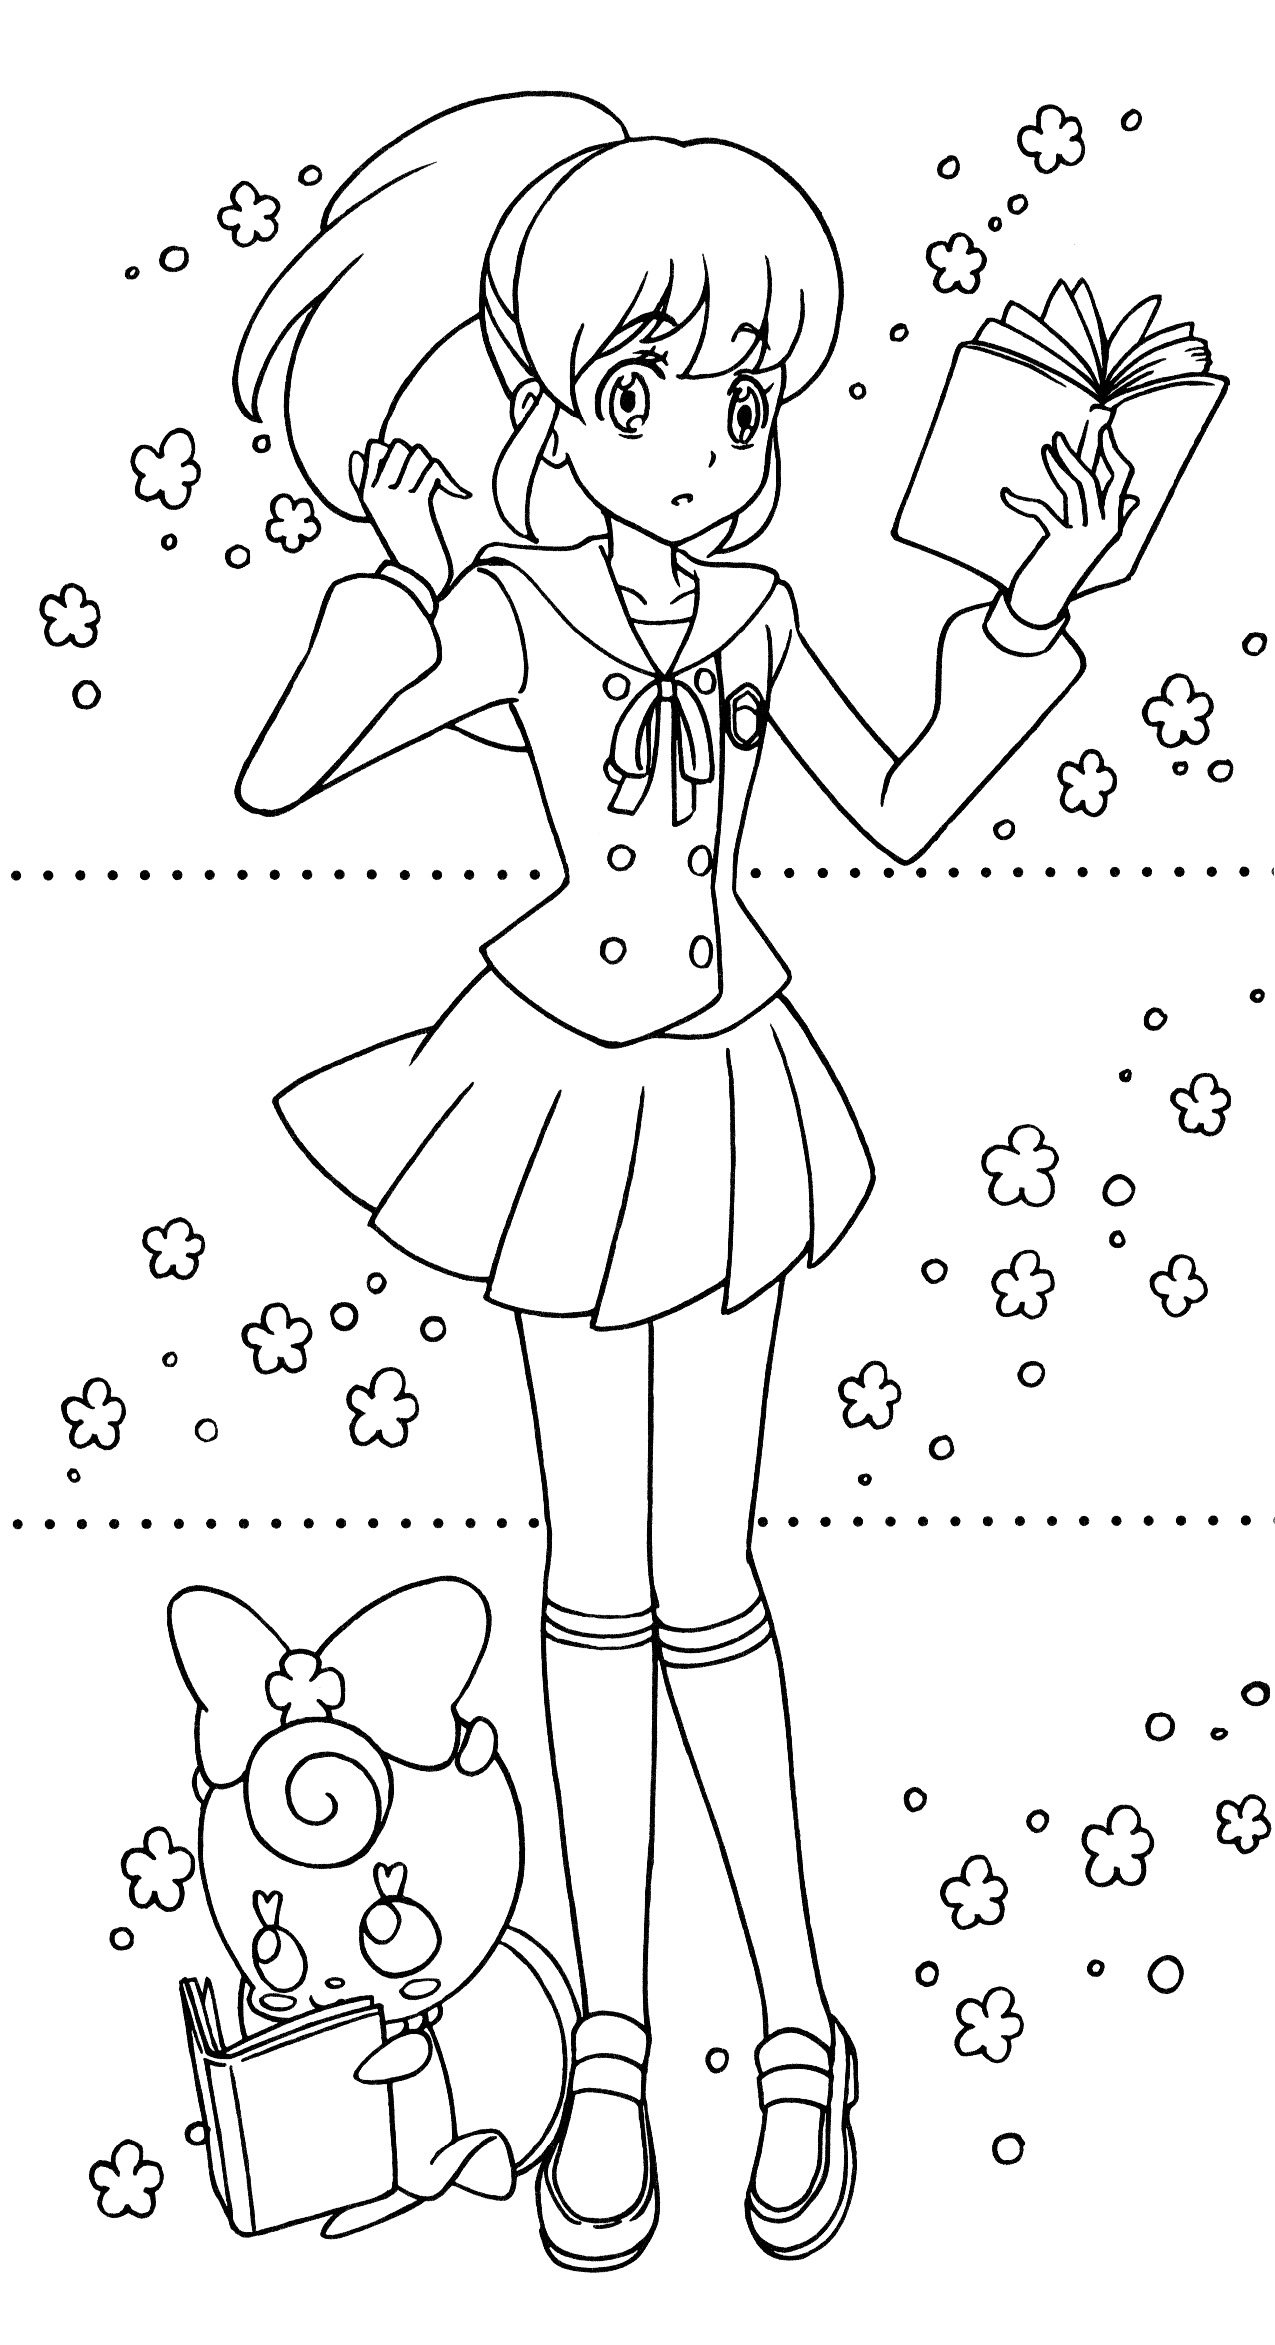 Happiness Charge Precure Dressup Coloring Book 17